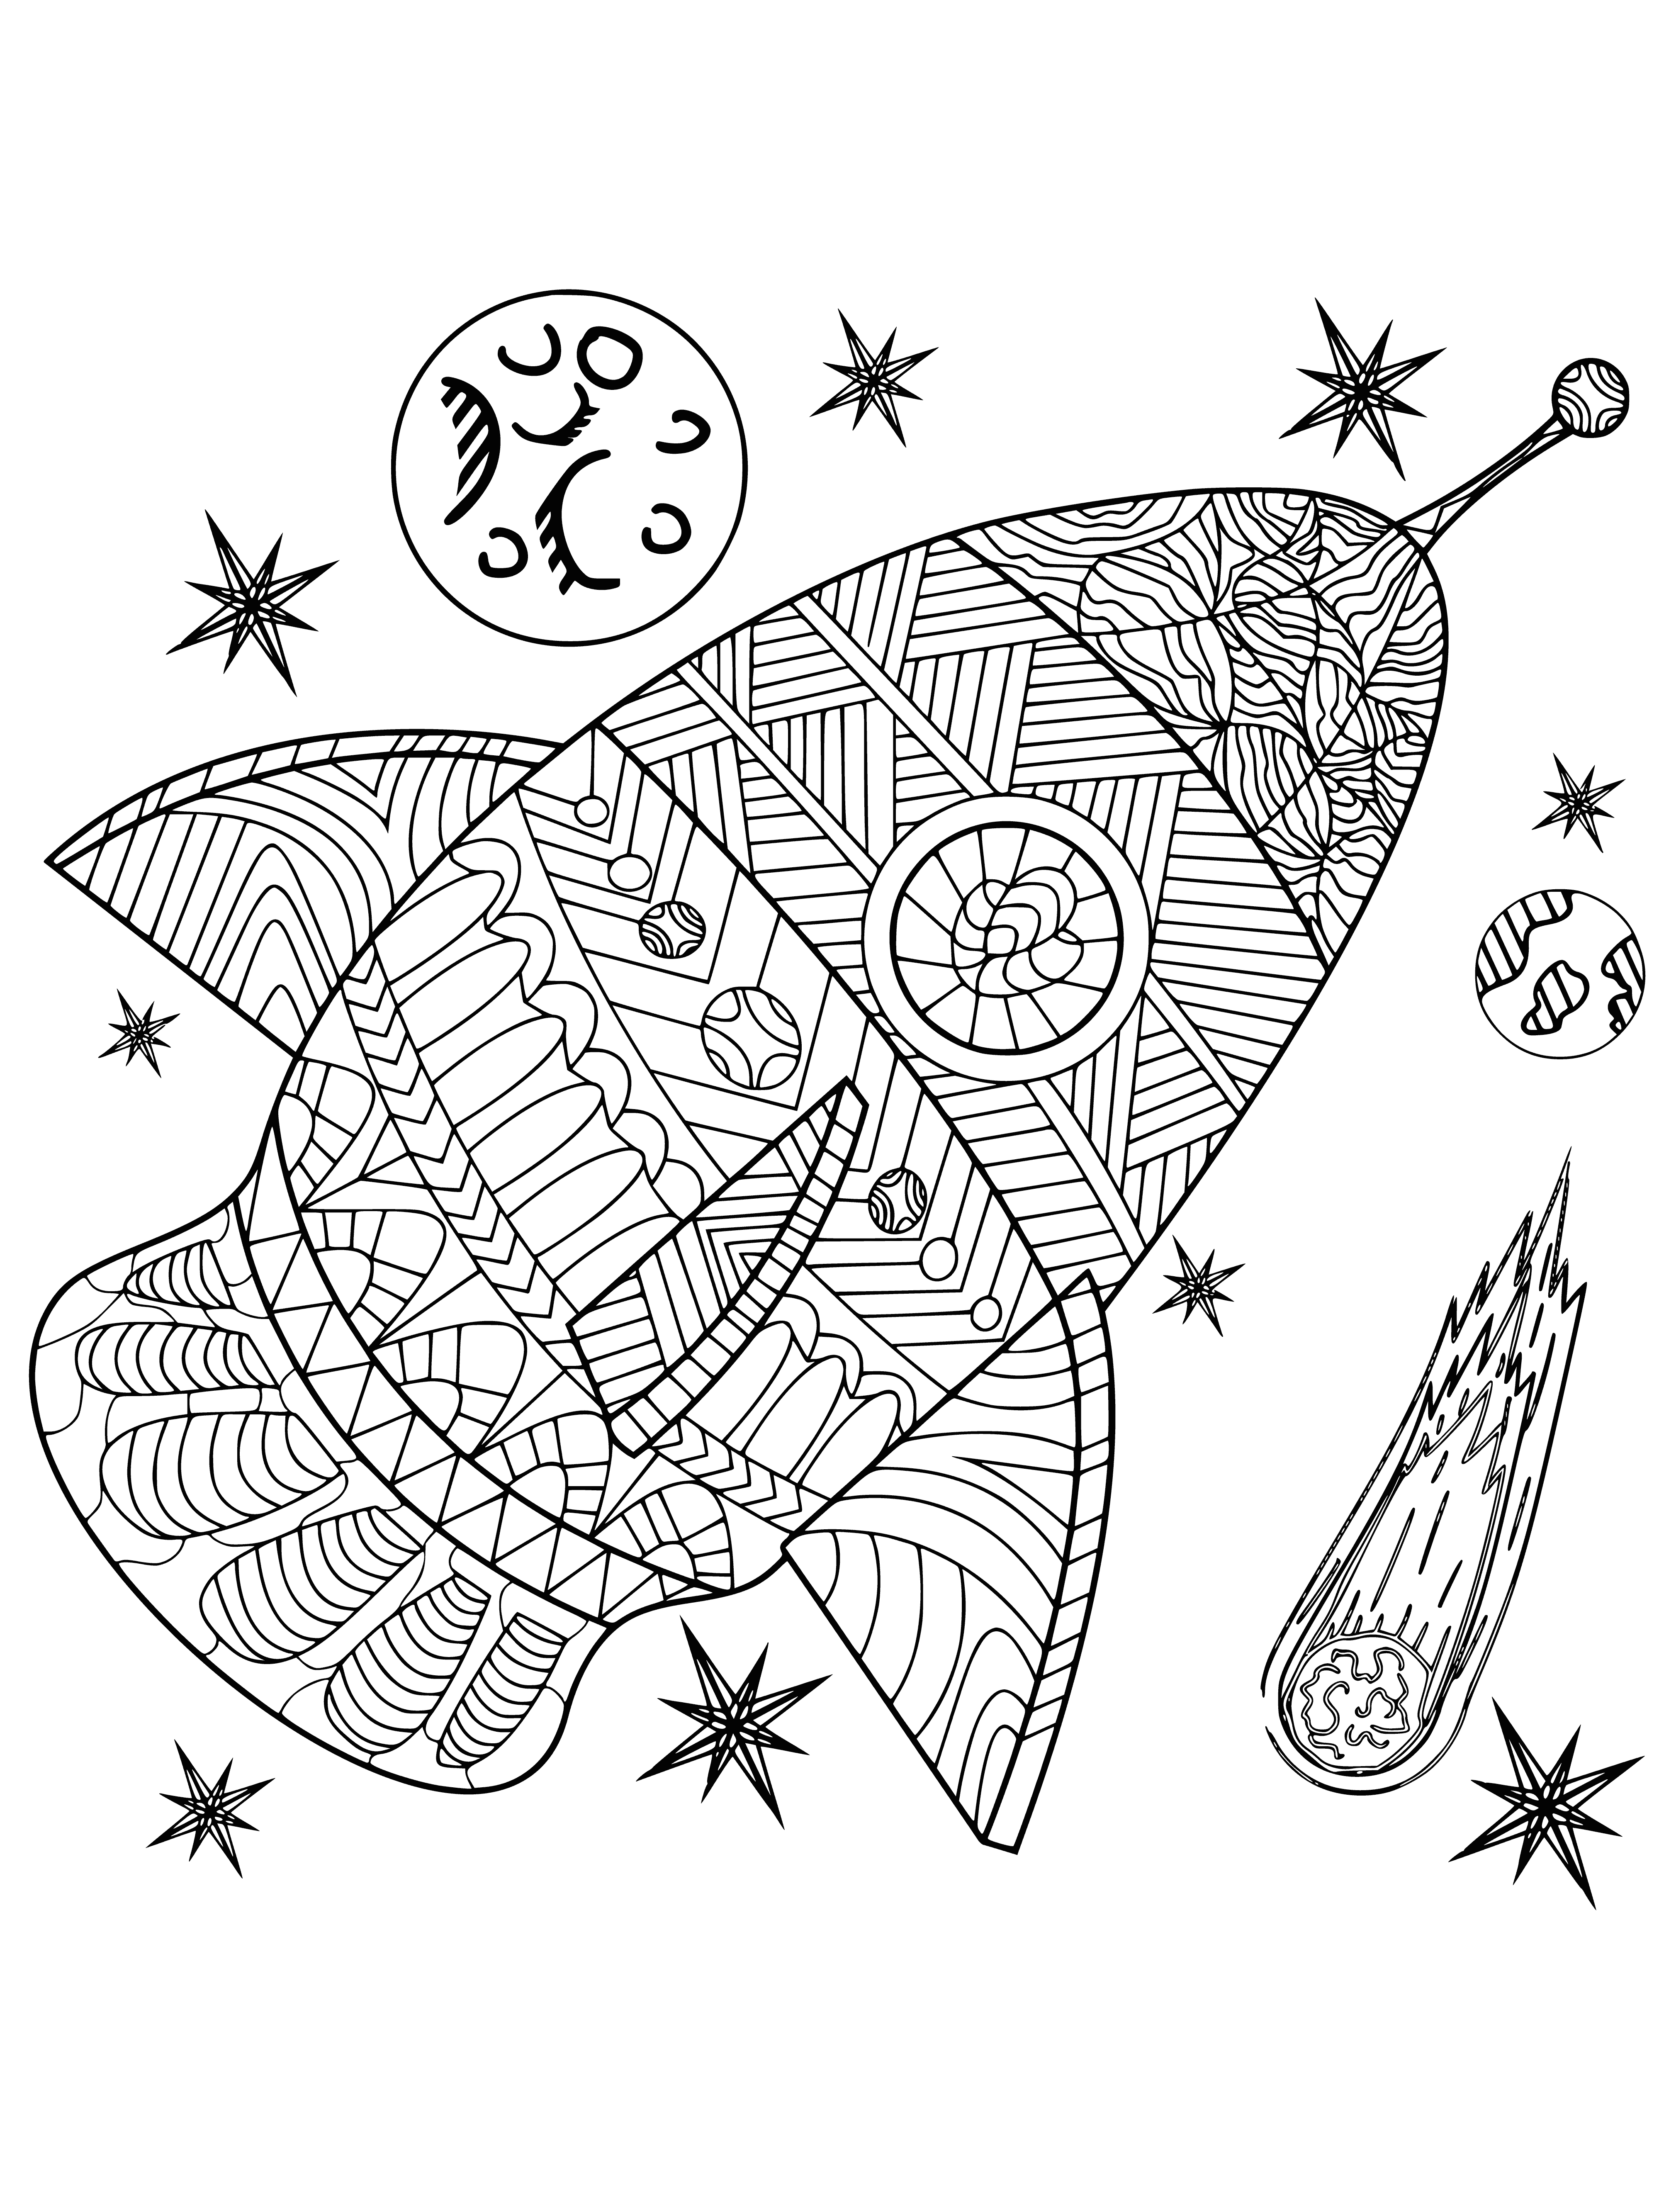 coloring page: Rocket in center of page, white with black & gray markings, against black background; perfect for relieving stress!